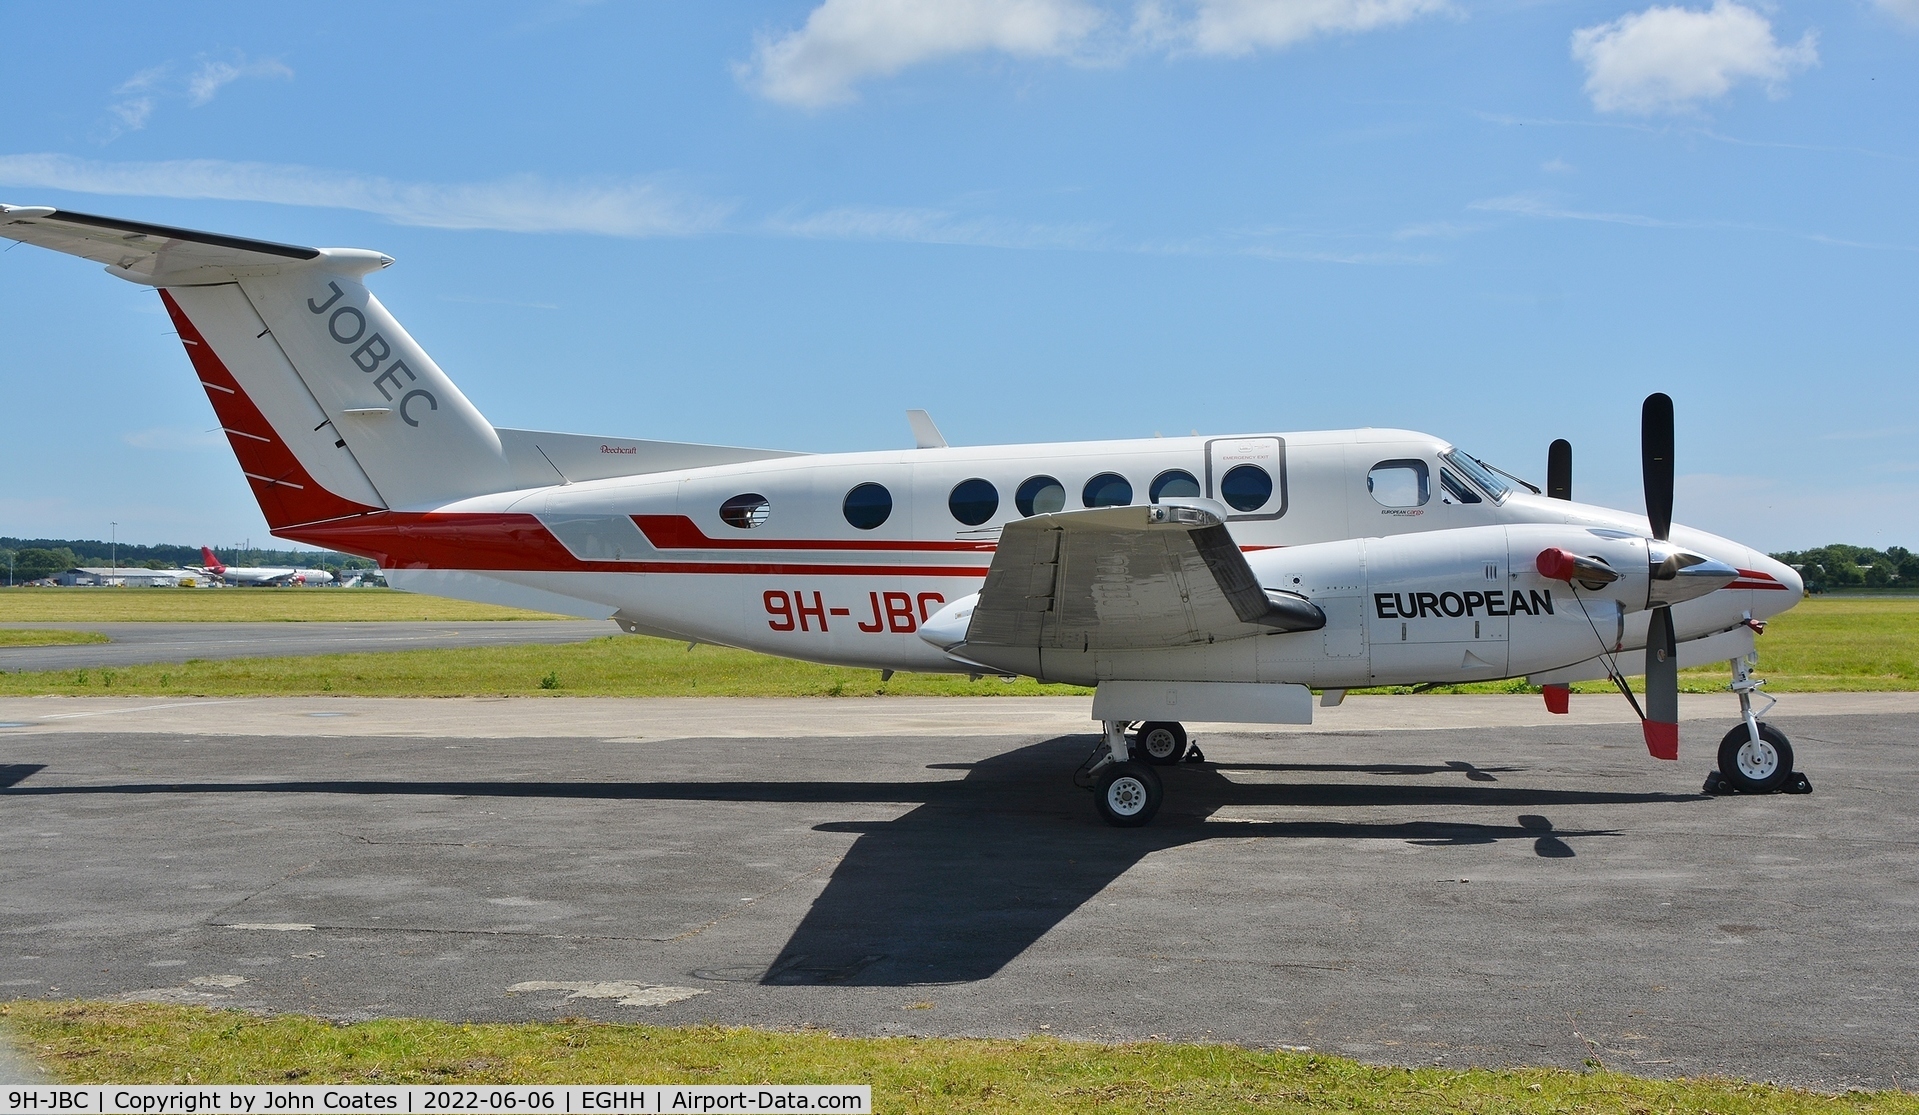 9H-JBC, 1977 Beech 200 Super King Air C/N BB-194, At BAS now with 